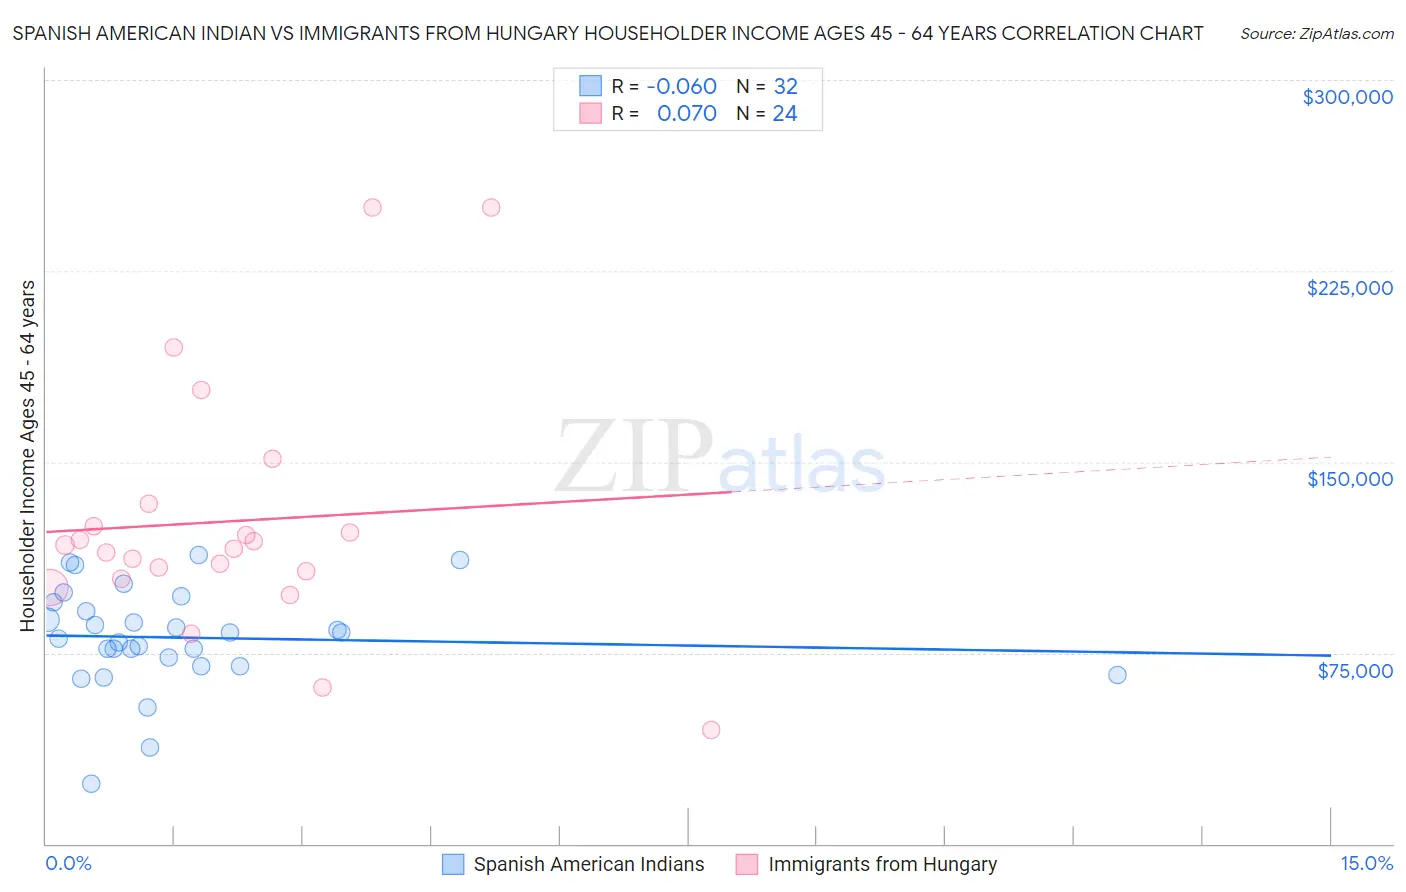 Spanish American Indian vs Immigrants from Hungary Householder Income Ages 45 - 64 years